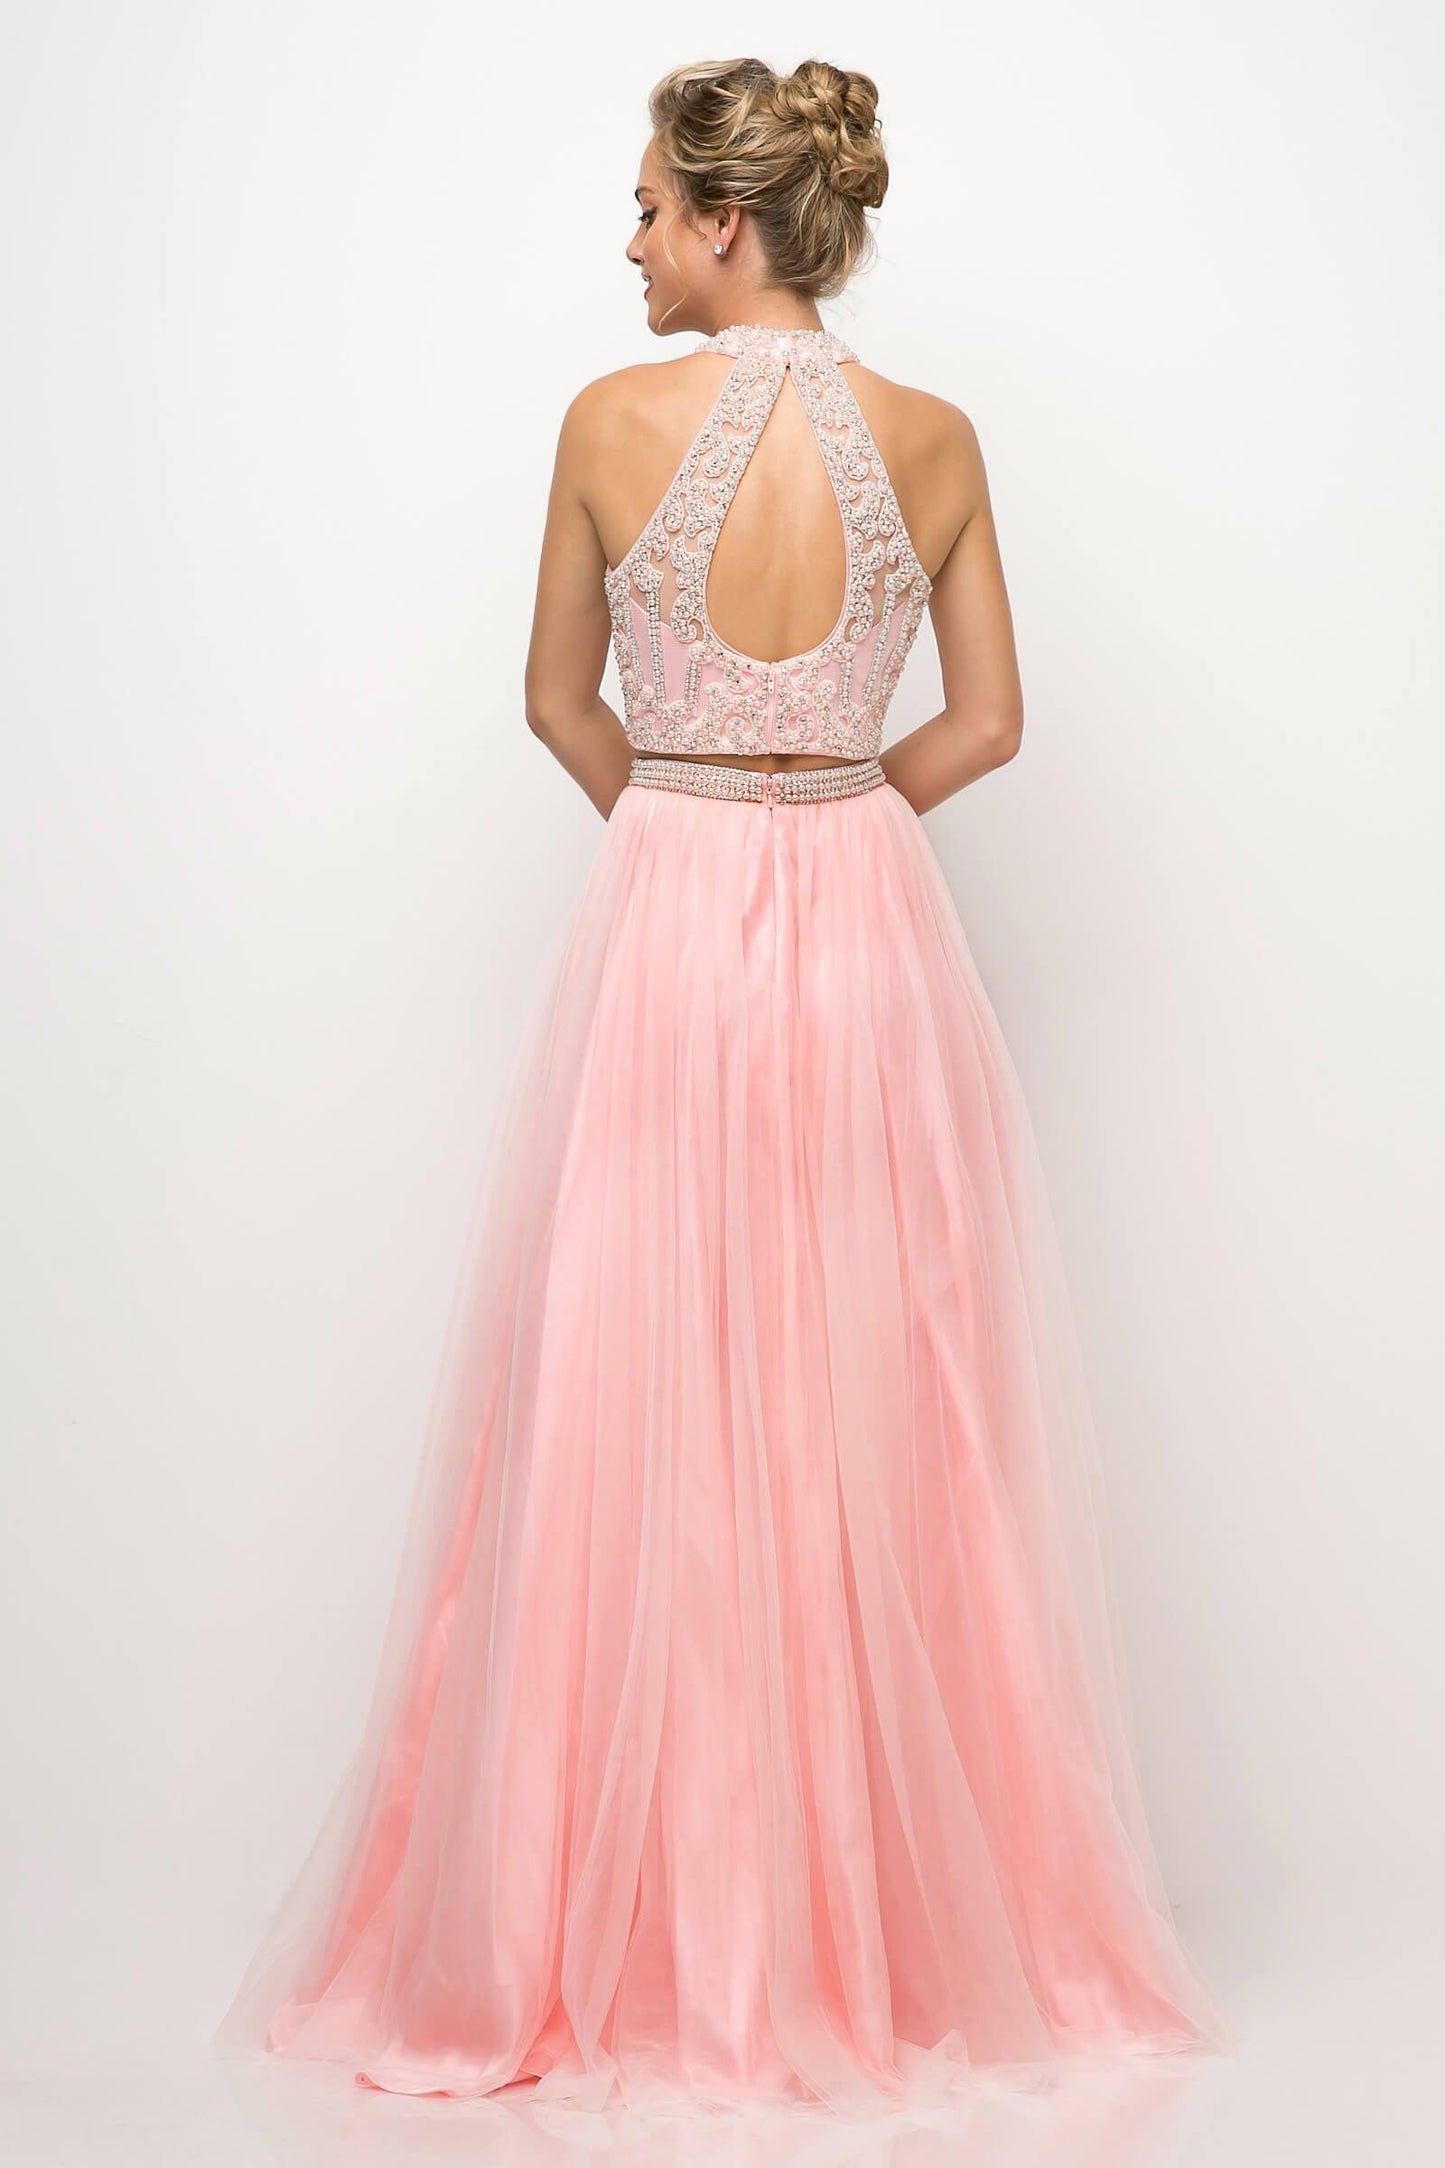 Long Ball Gown Beaded 2 Piece Prom Dress - The Dress Outlet Cinderella Divine